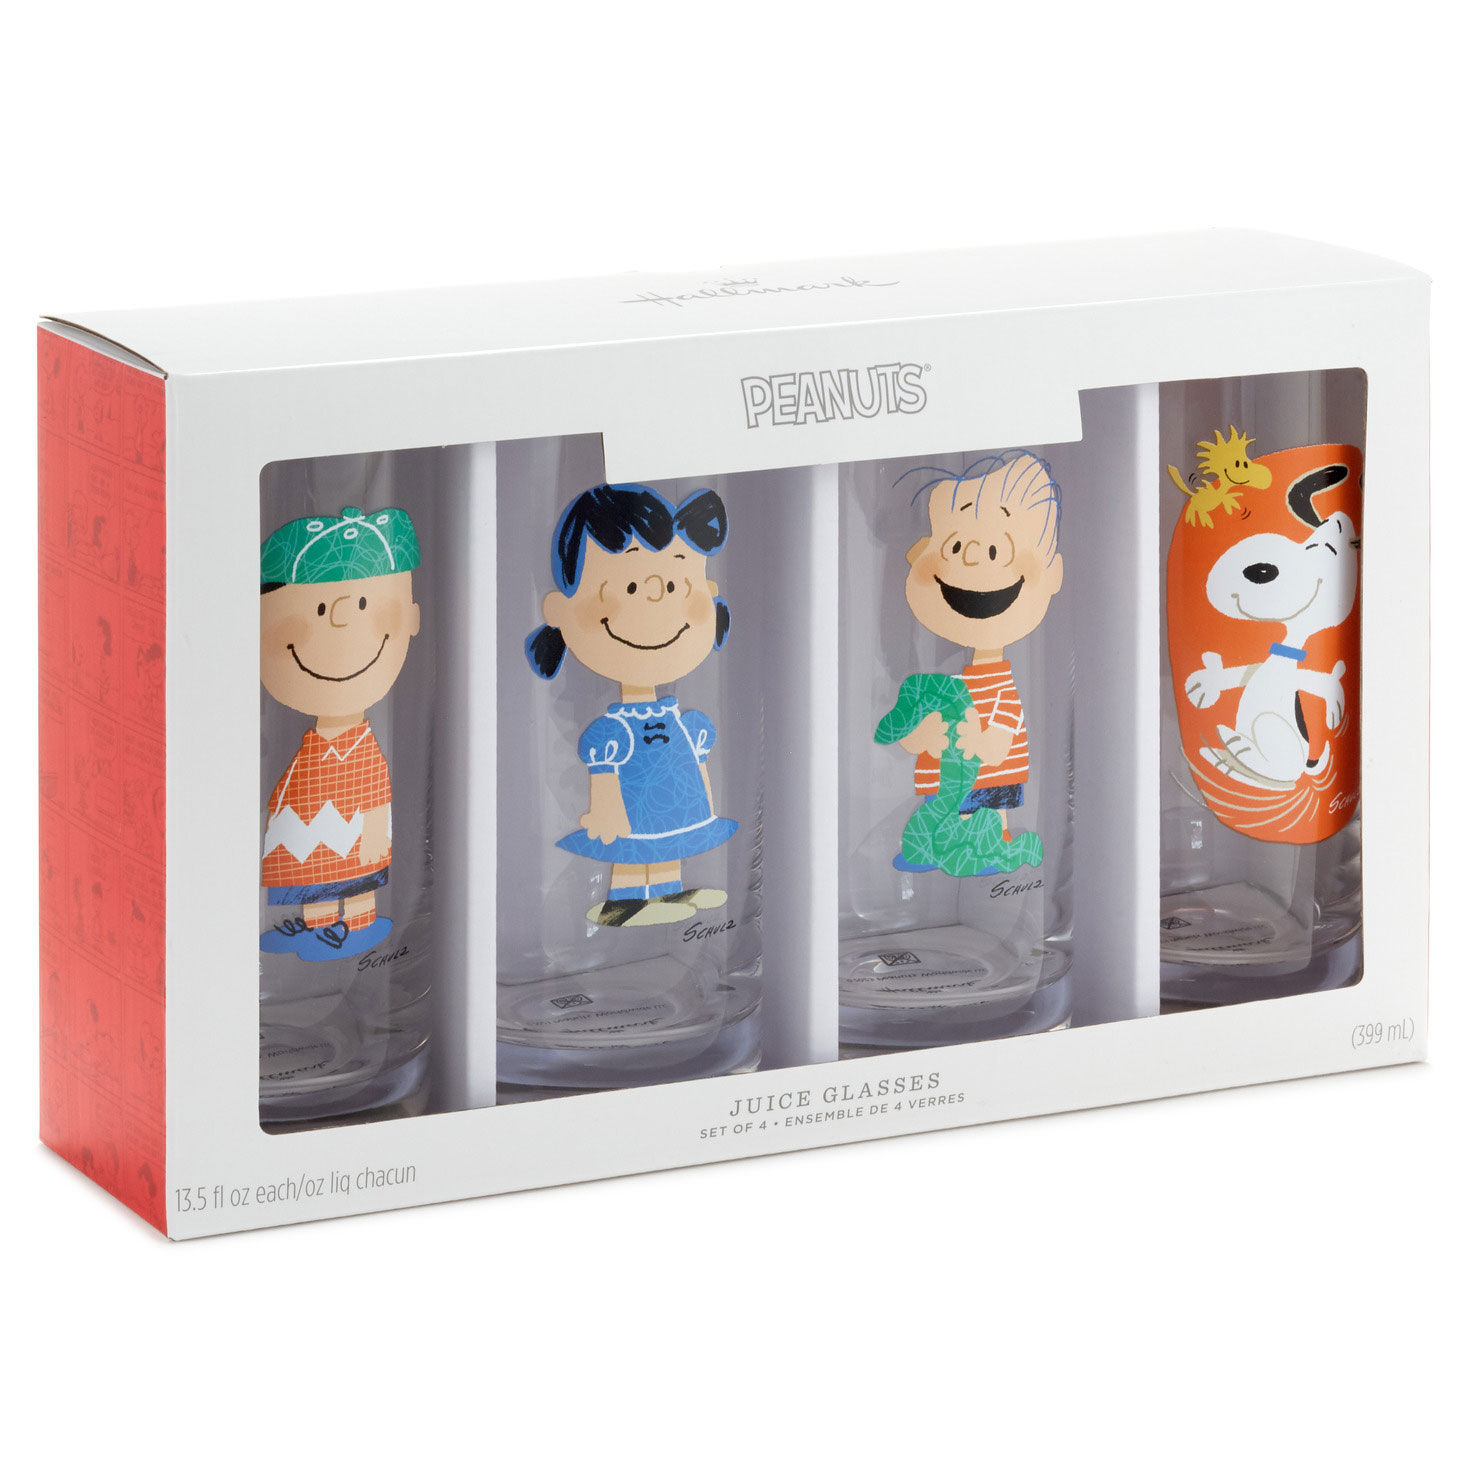 Peanuts® Snoopy and Friends Tall Drinking Glasses, Set of 4